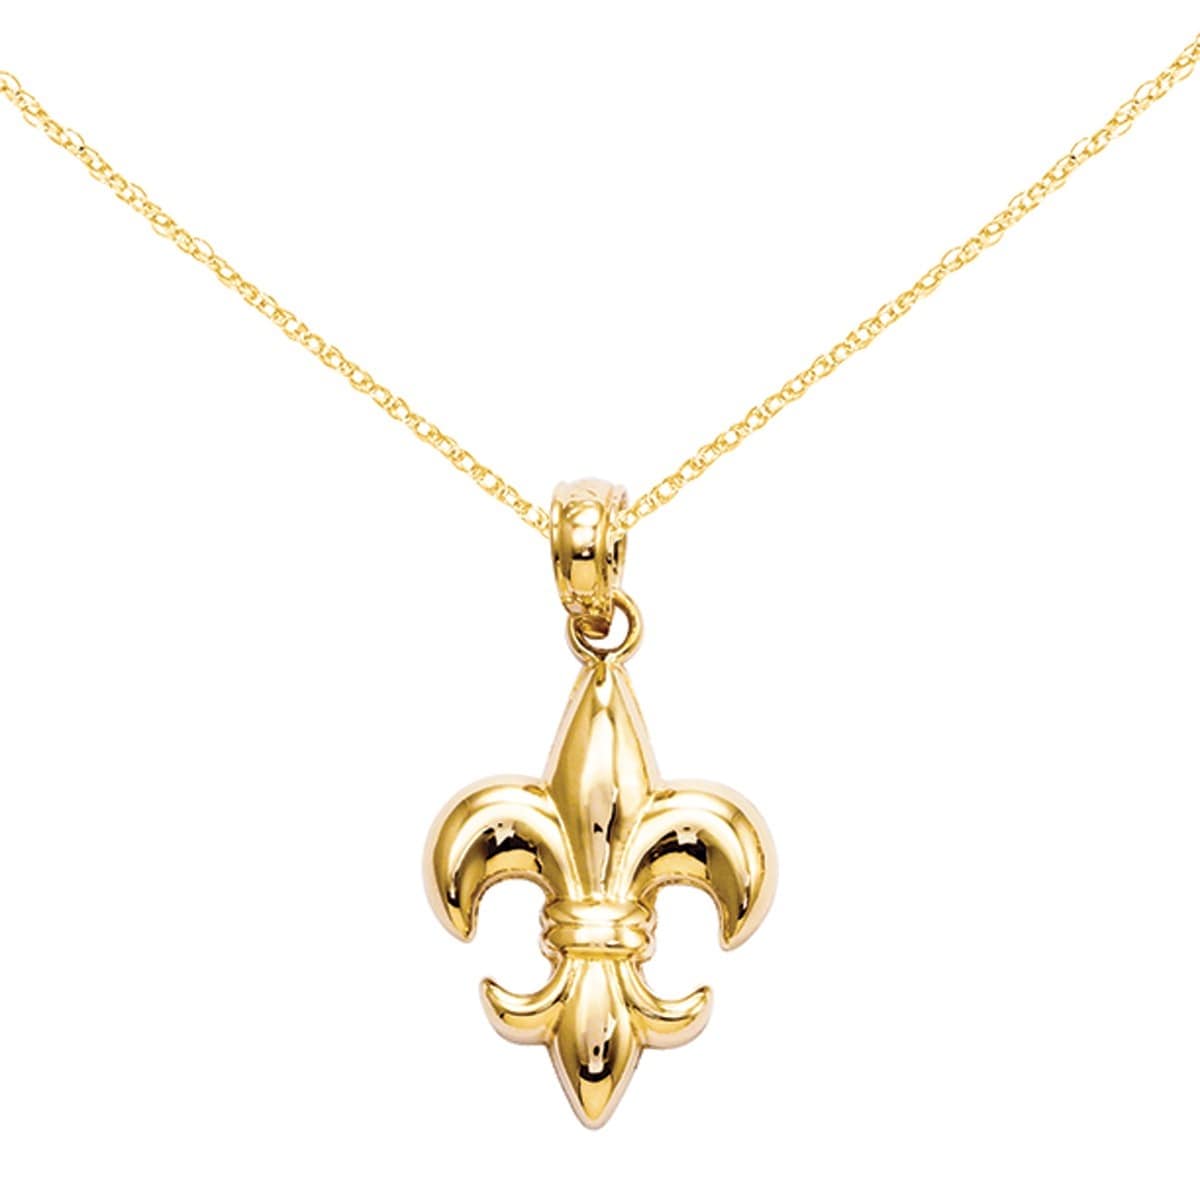 14K Yellow Gold Small Fleur De Lis in Oval Charm Pendant MSRP $145